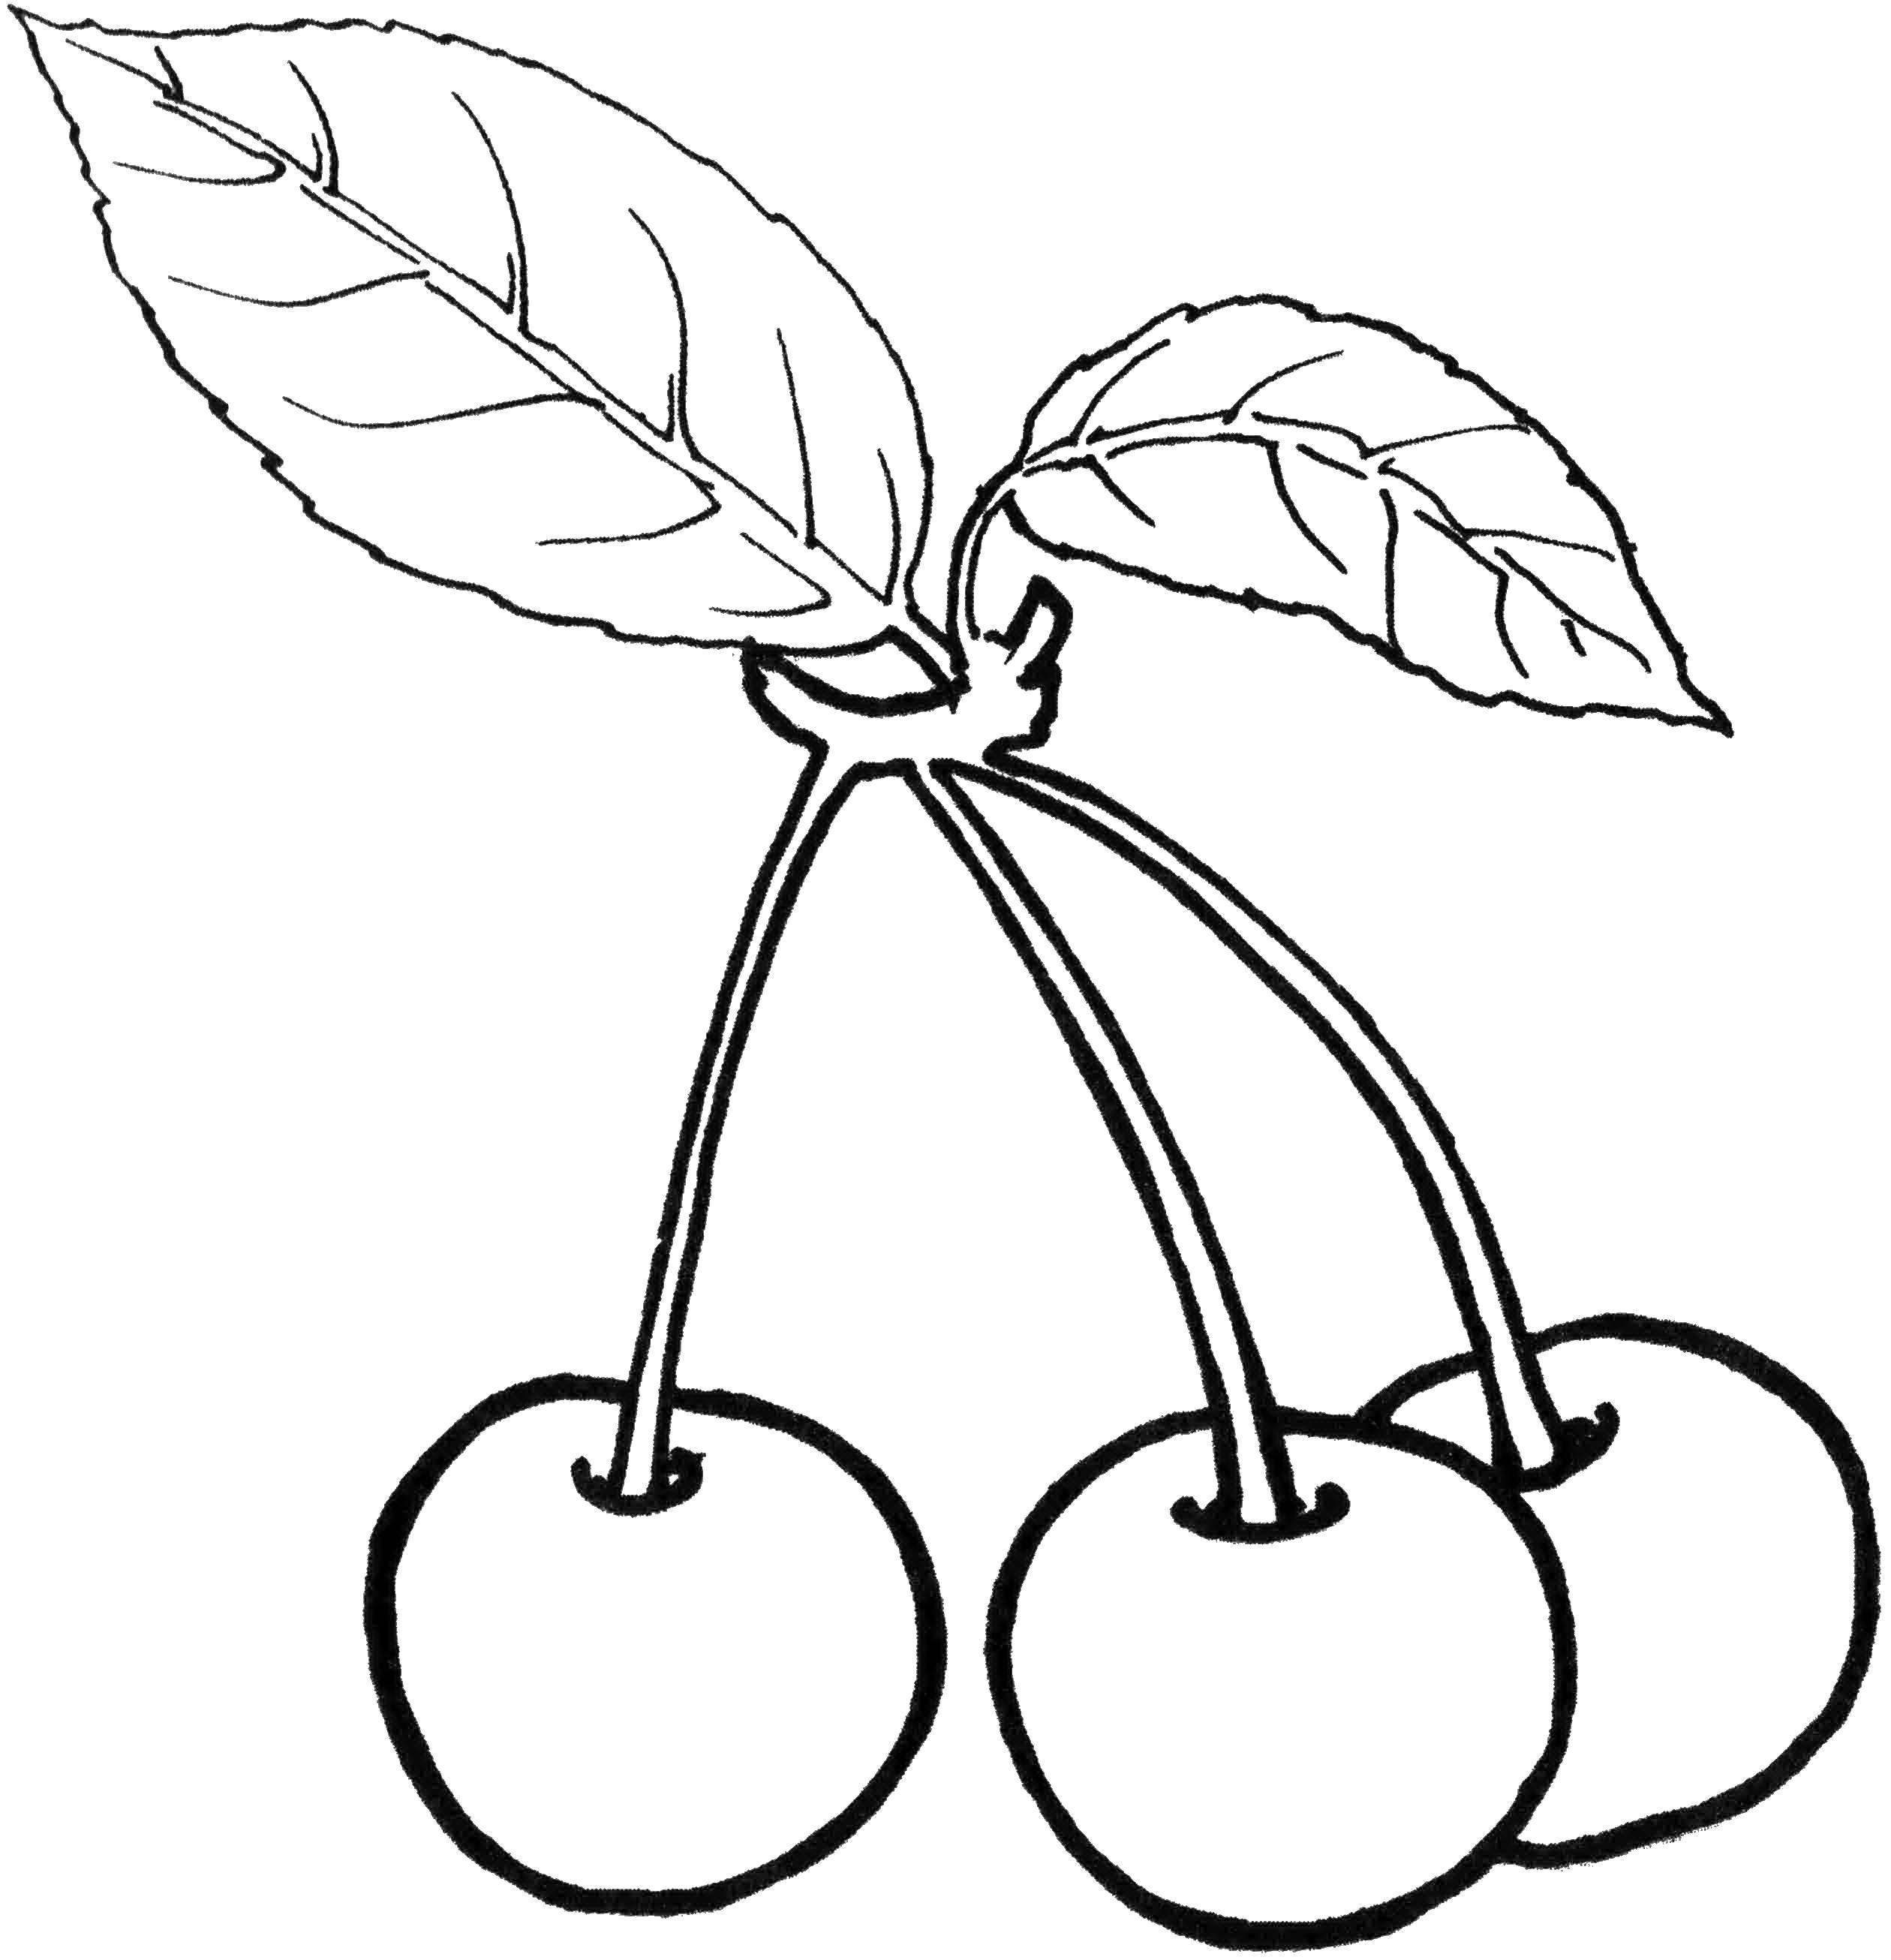 Coloring Three cherries and leaf. Category berry. Tags:  Berries, cherry.